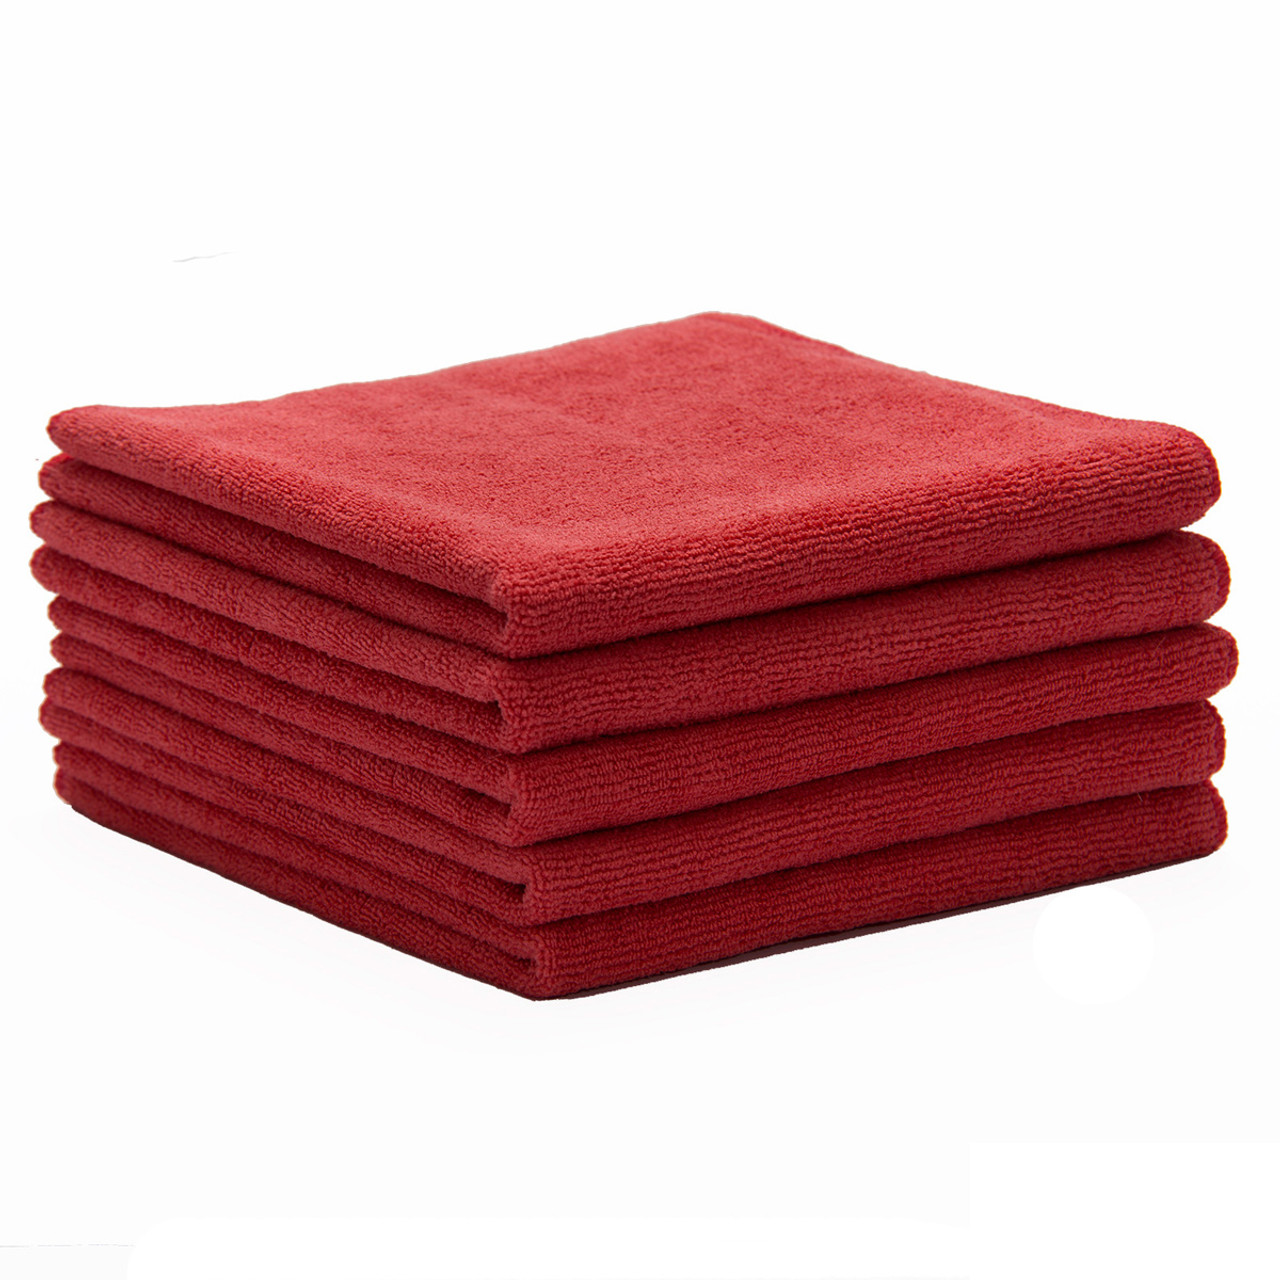 Recycled Wash Cloth - Heavy Weight